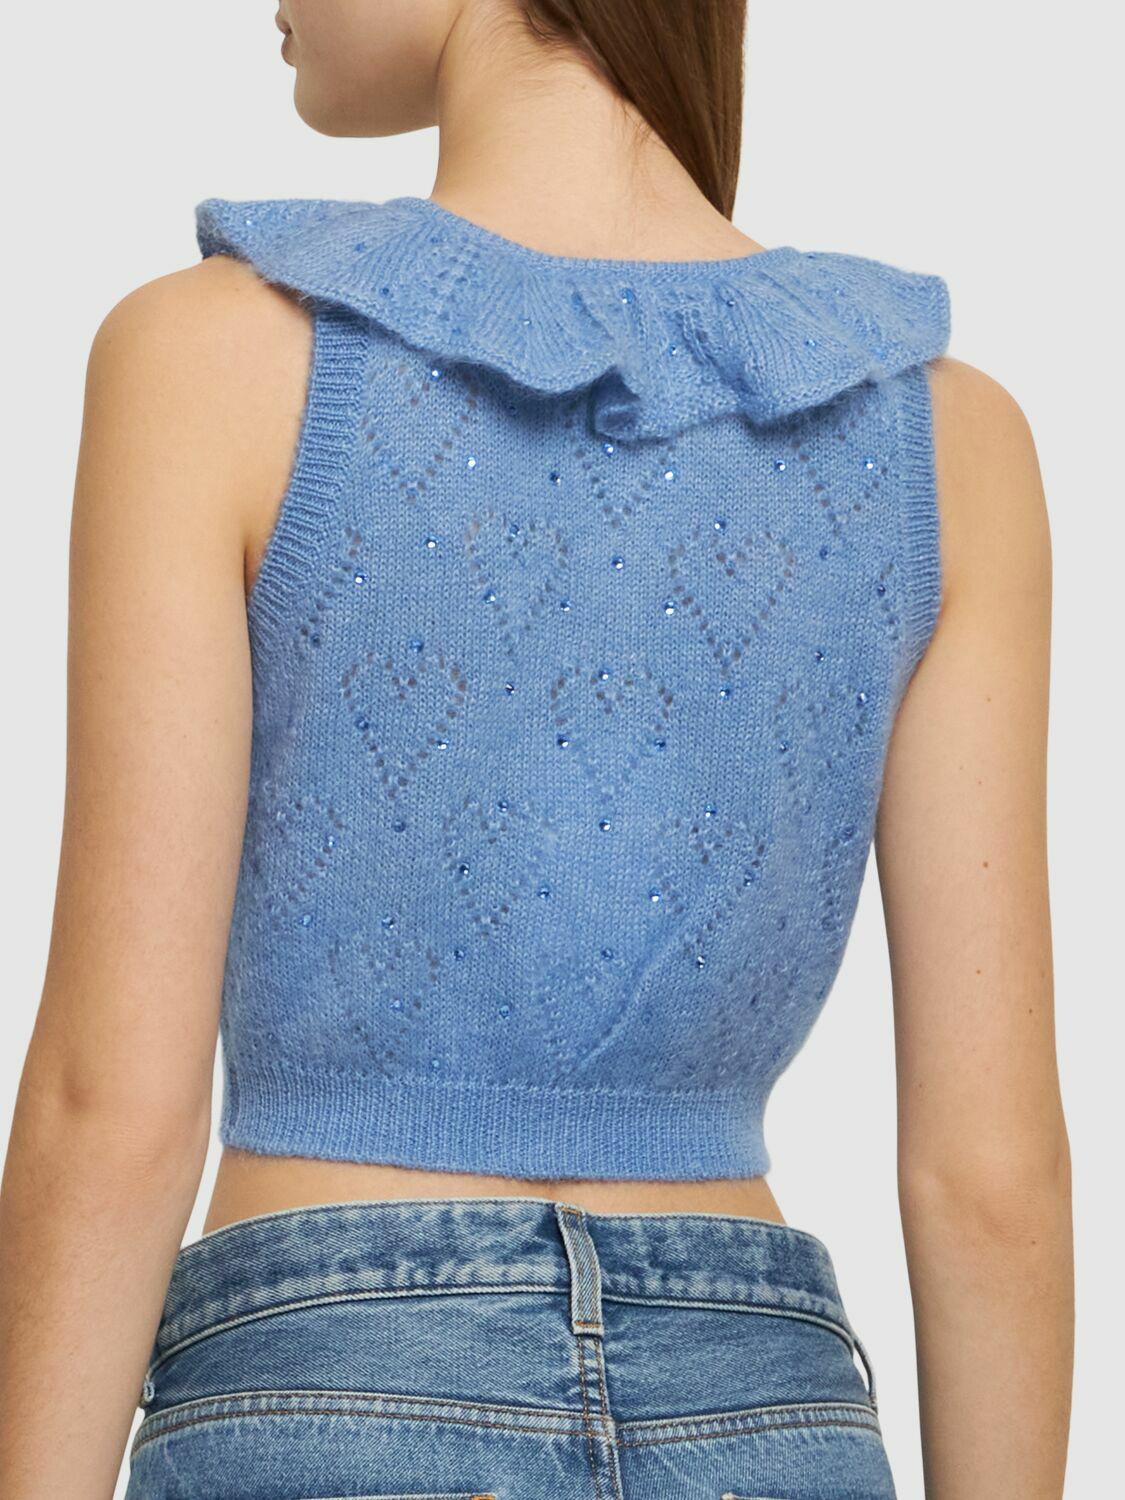 cable-knit sleeveless top, Alessandra Rich